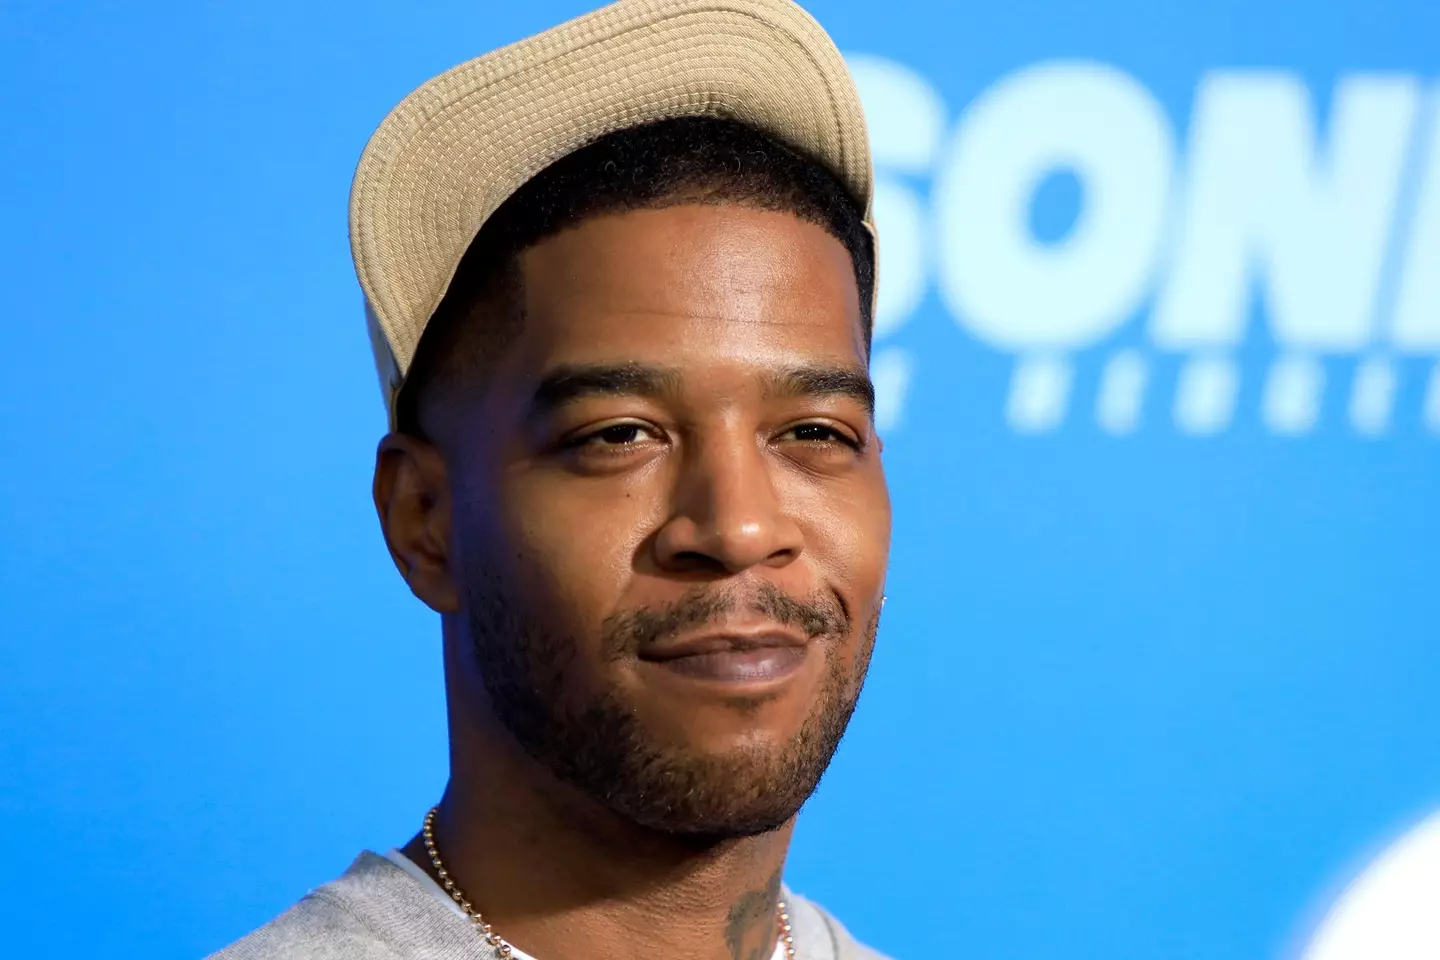 Cudi had to go to physical rehab after suffering his stroke.